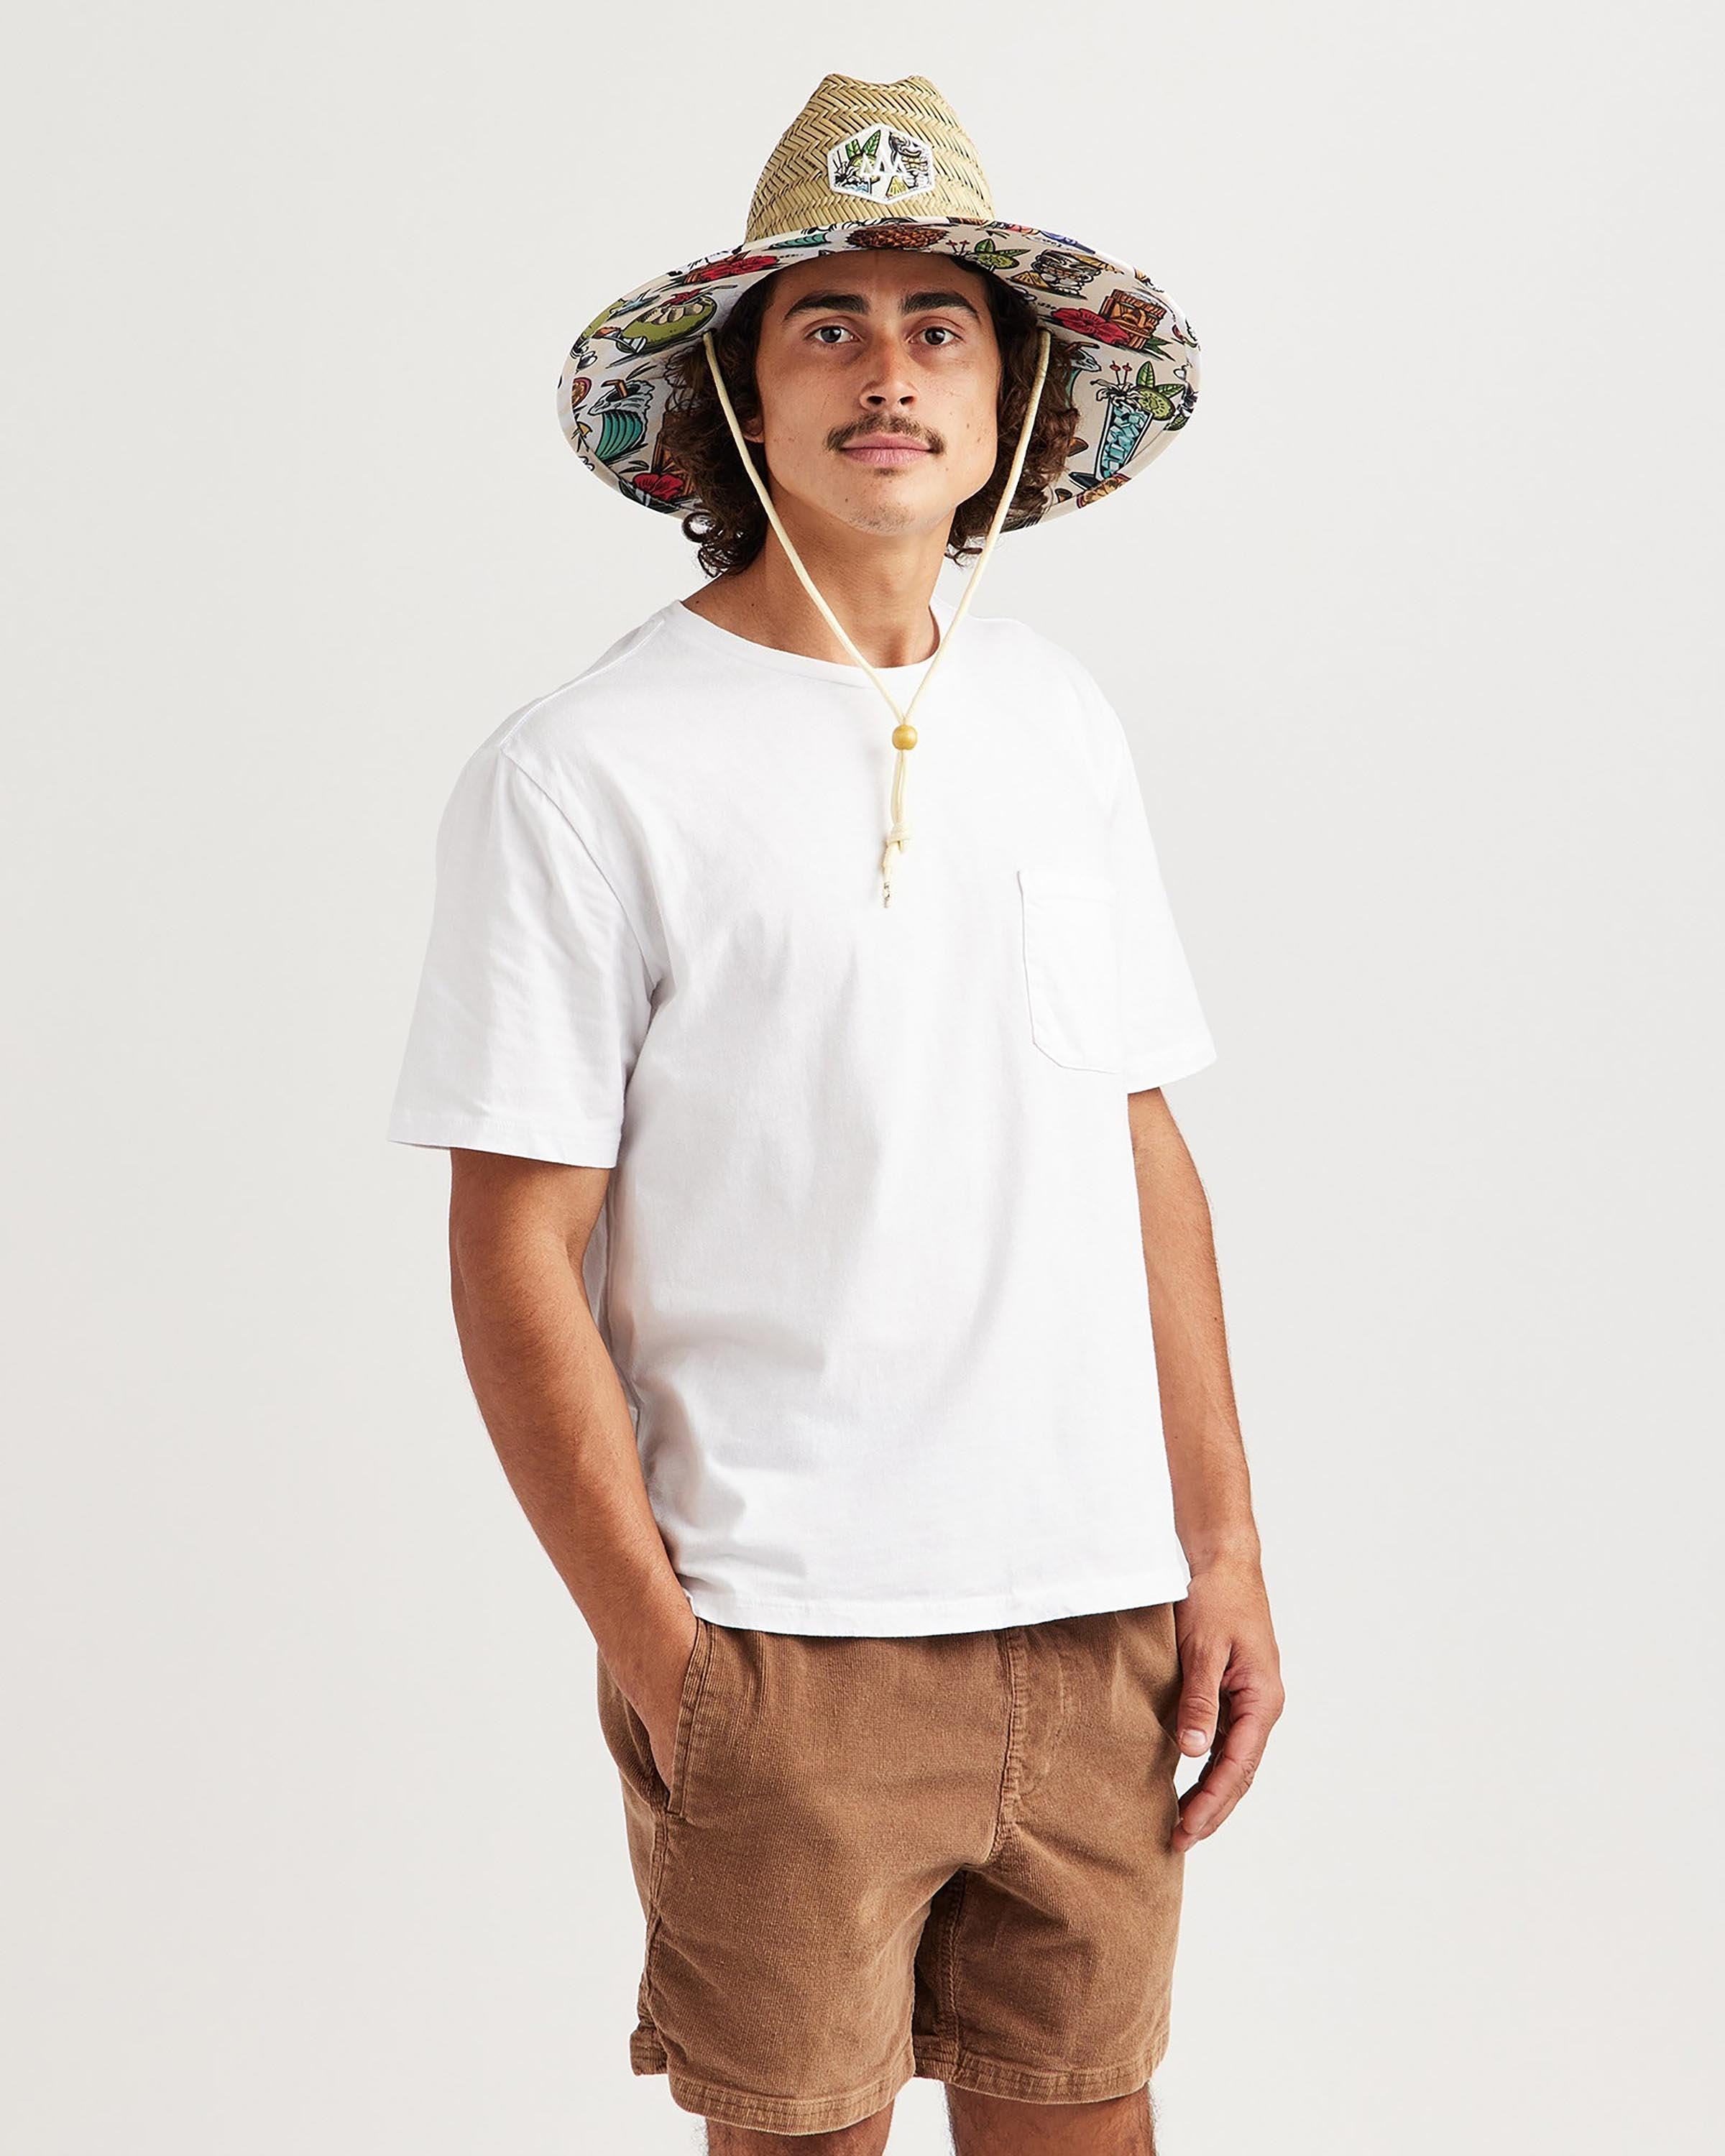 Last Call - undefined - Hemlock Hat Co. Lifeguards - Adults